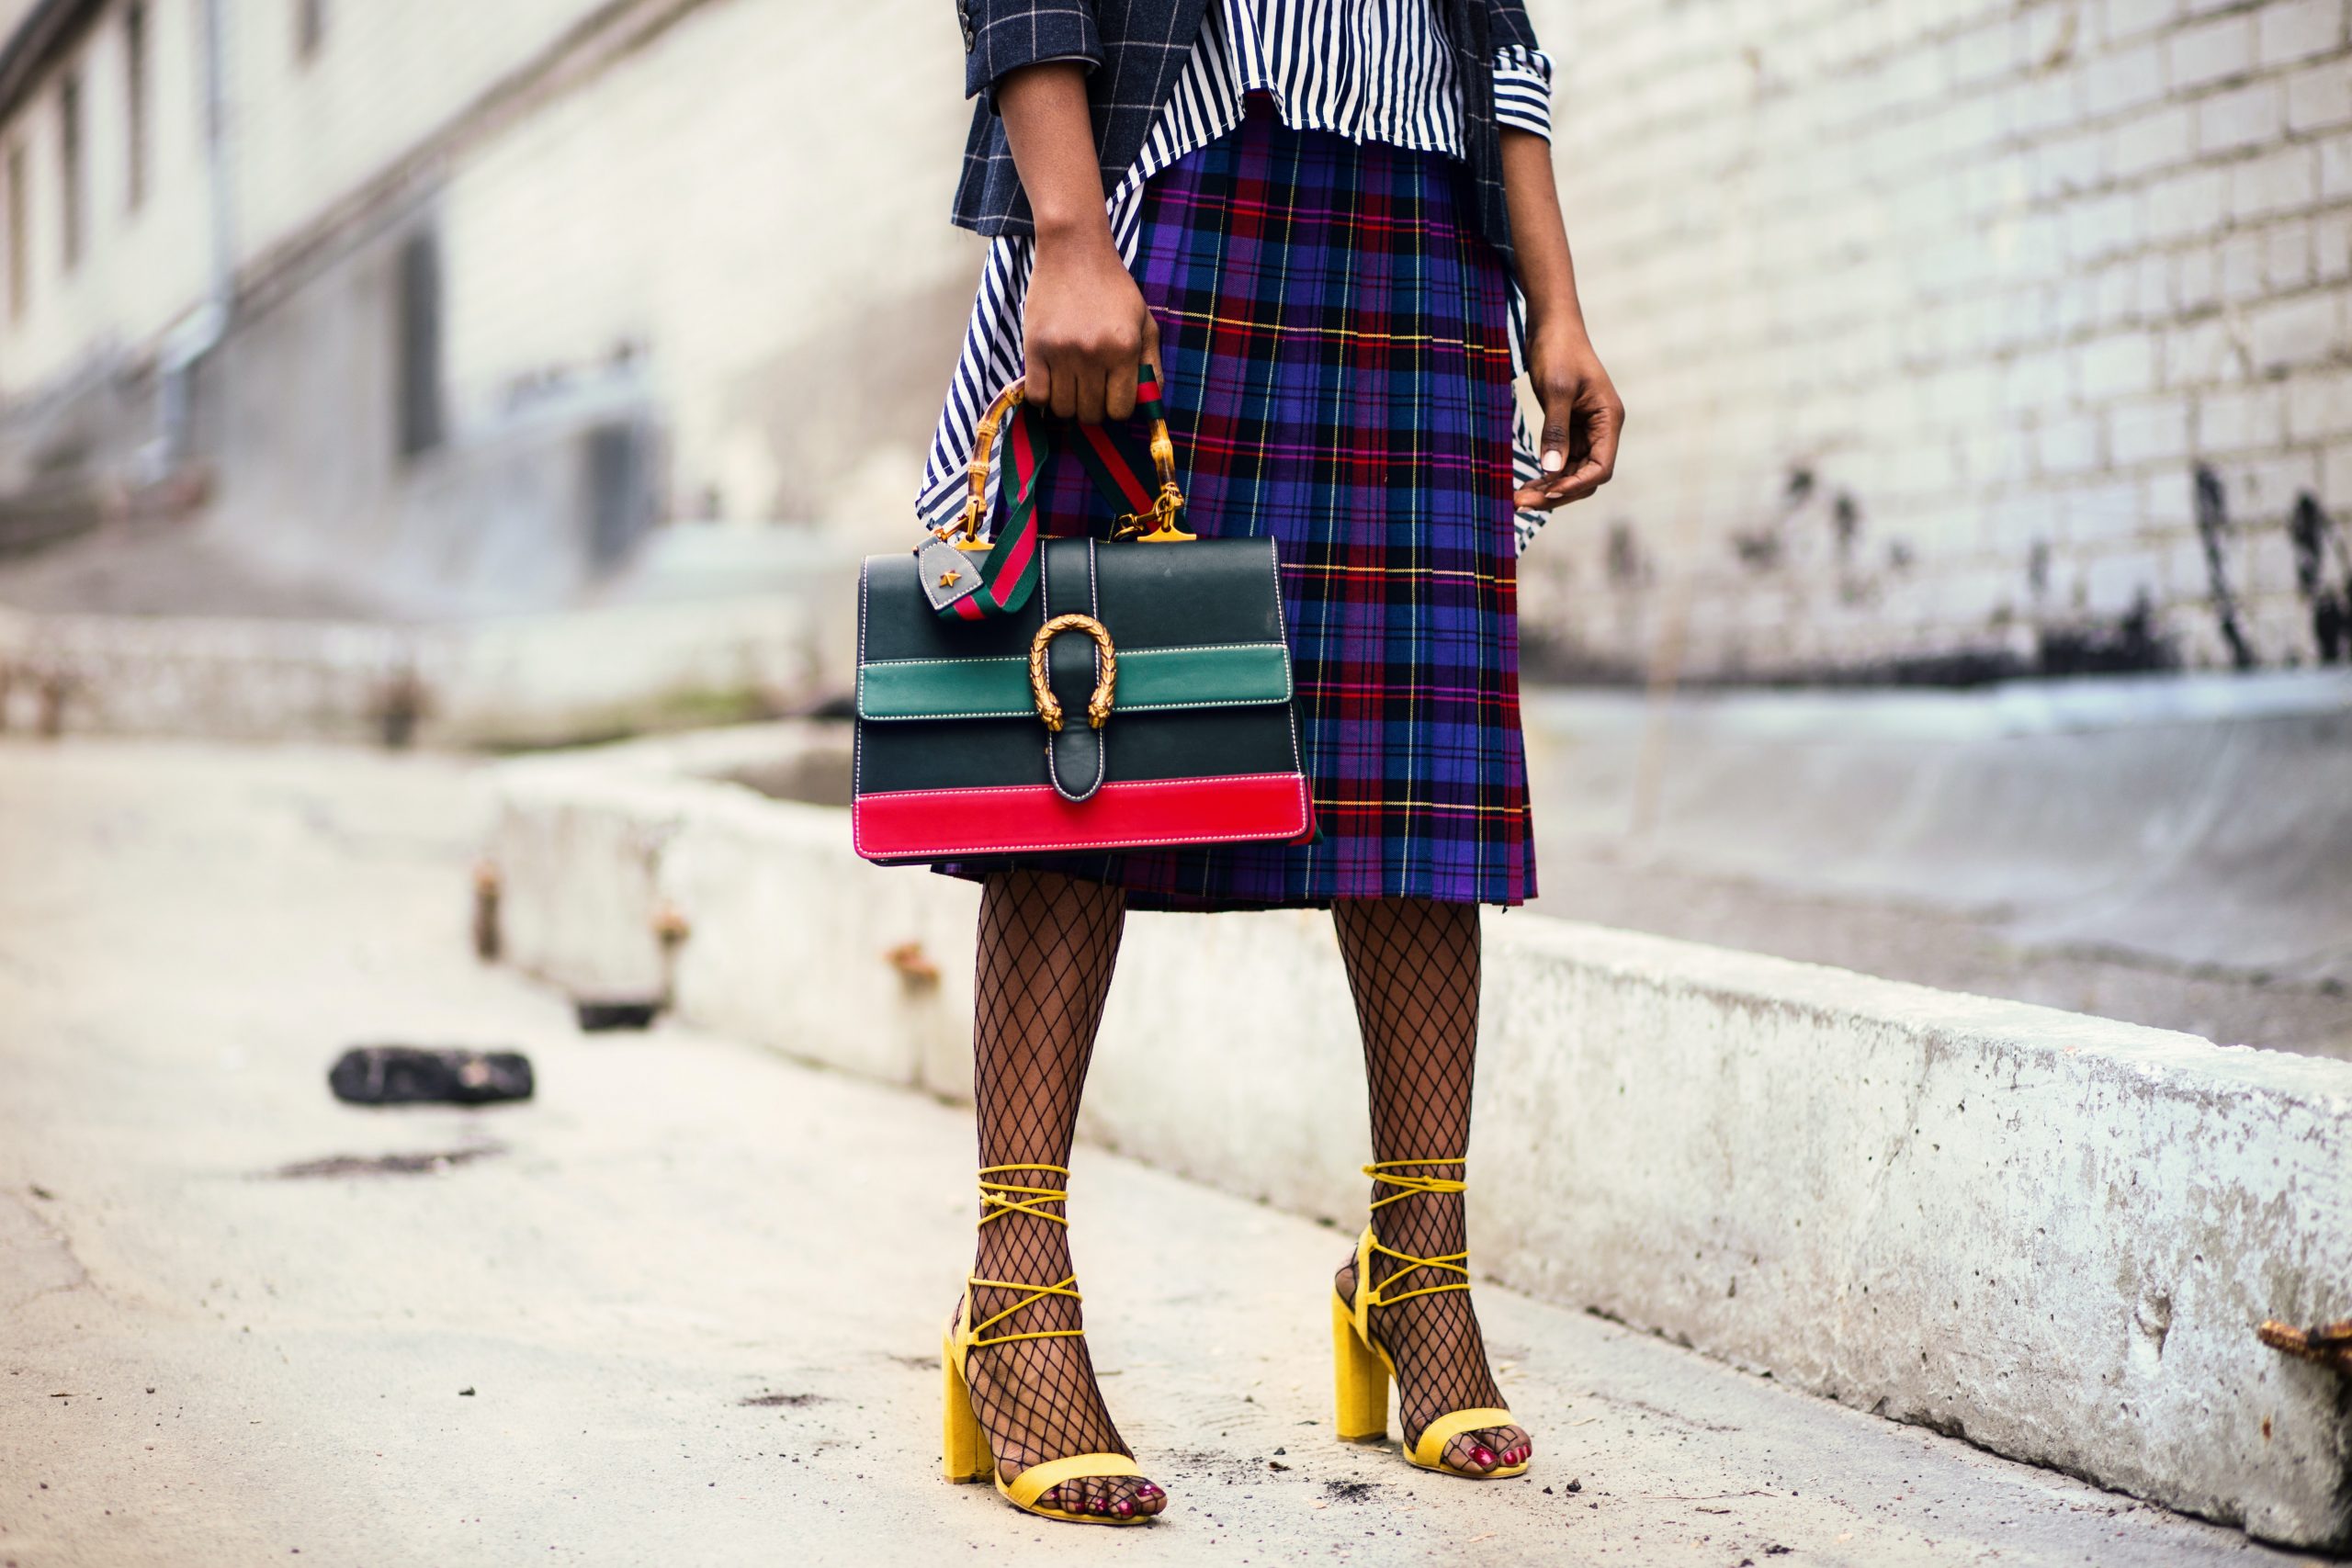 Handbag models you must have in your closet